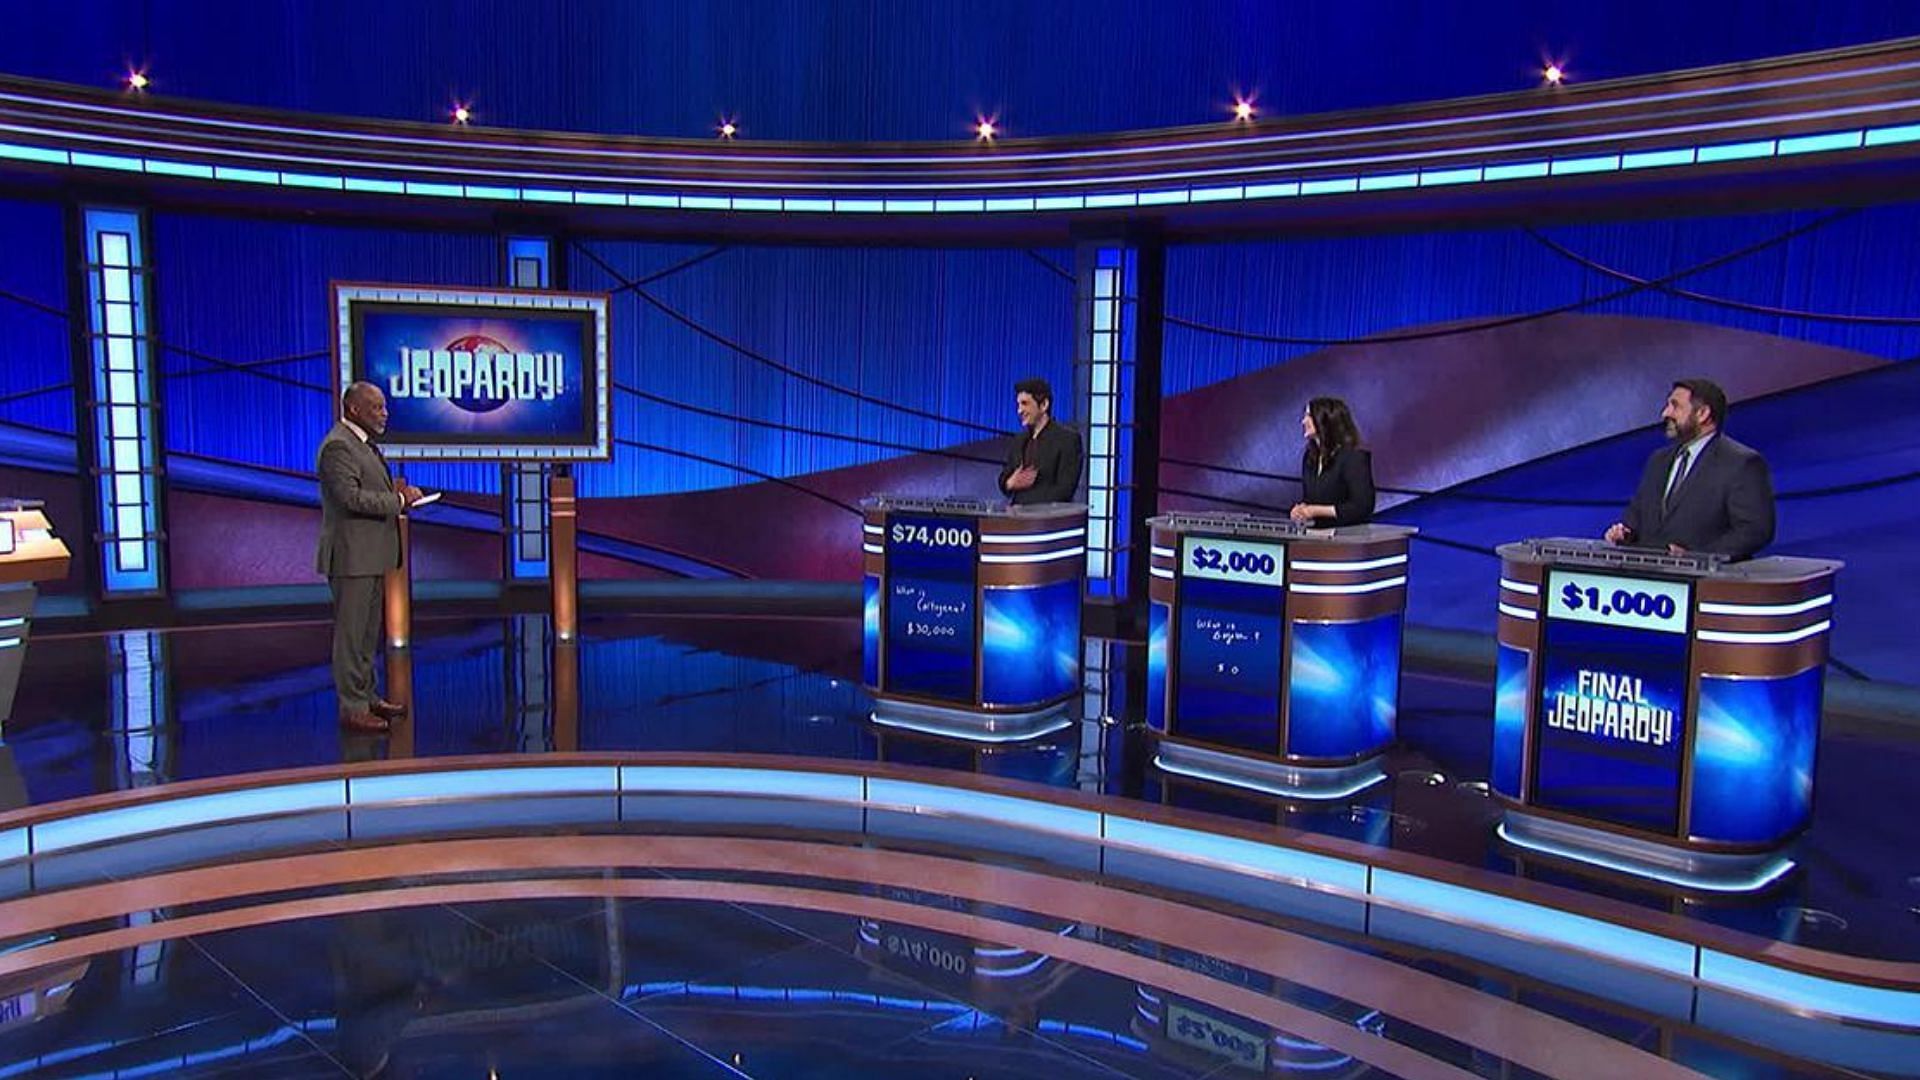 A still from the game show Jeopardy! (Image via Jeopardy!)